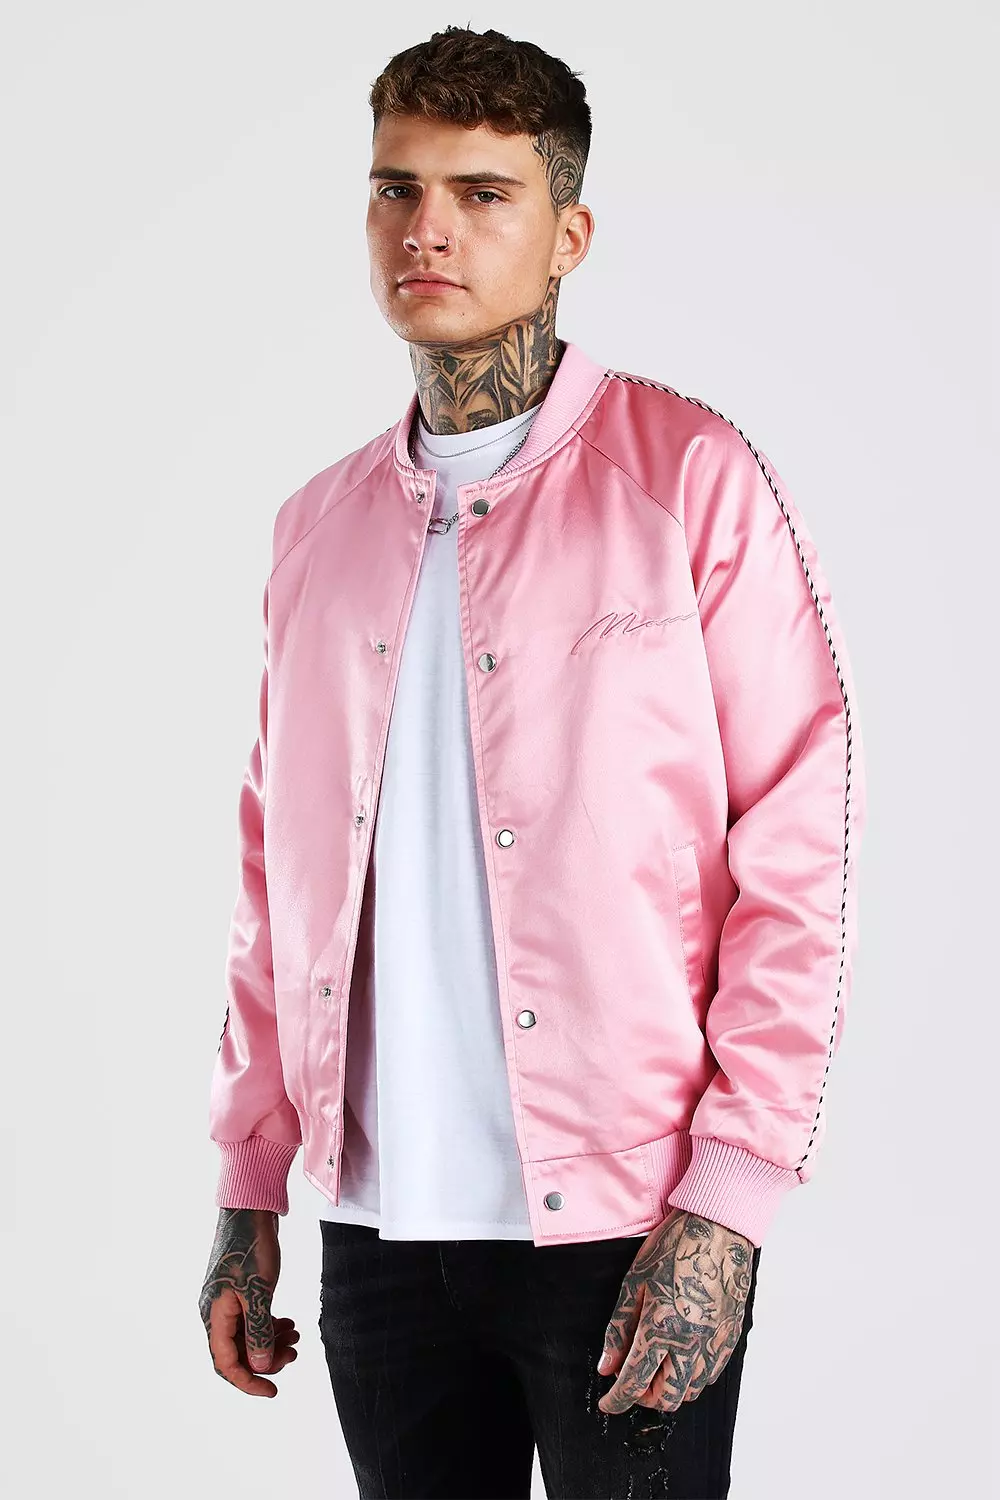 Satin Bomber Jacket With Chest Man Embroidery